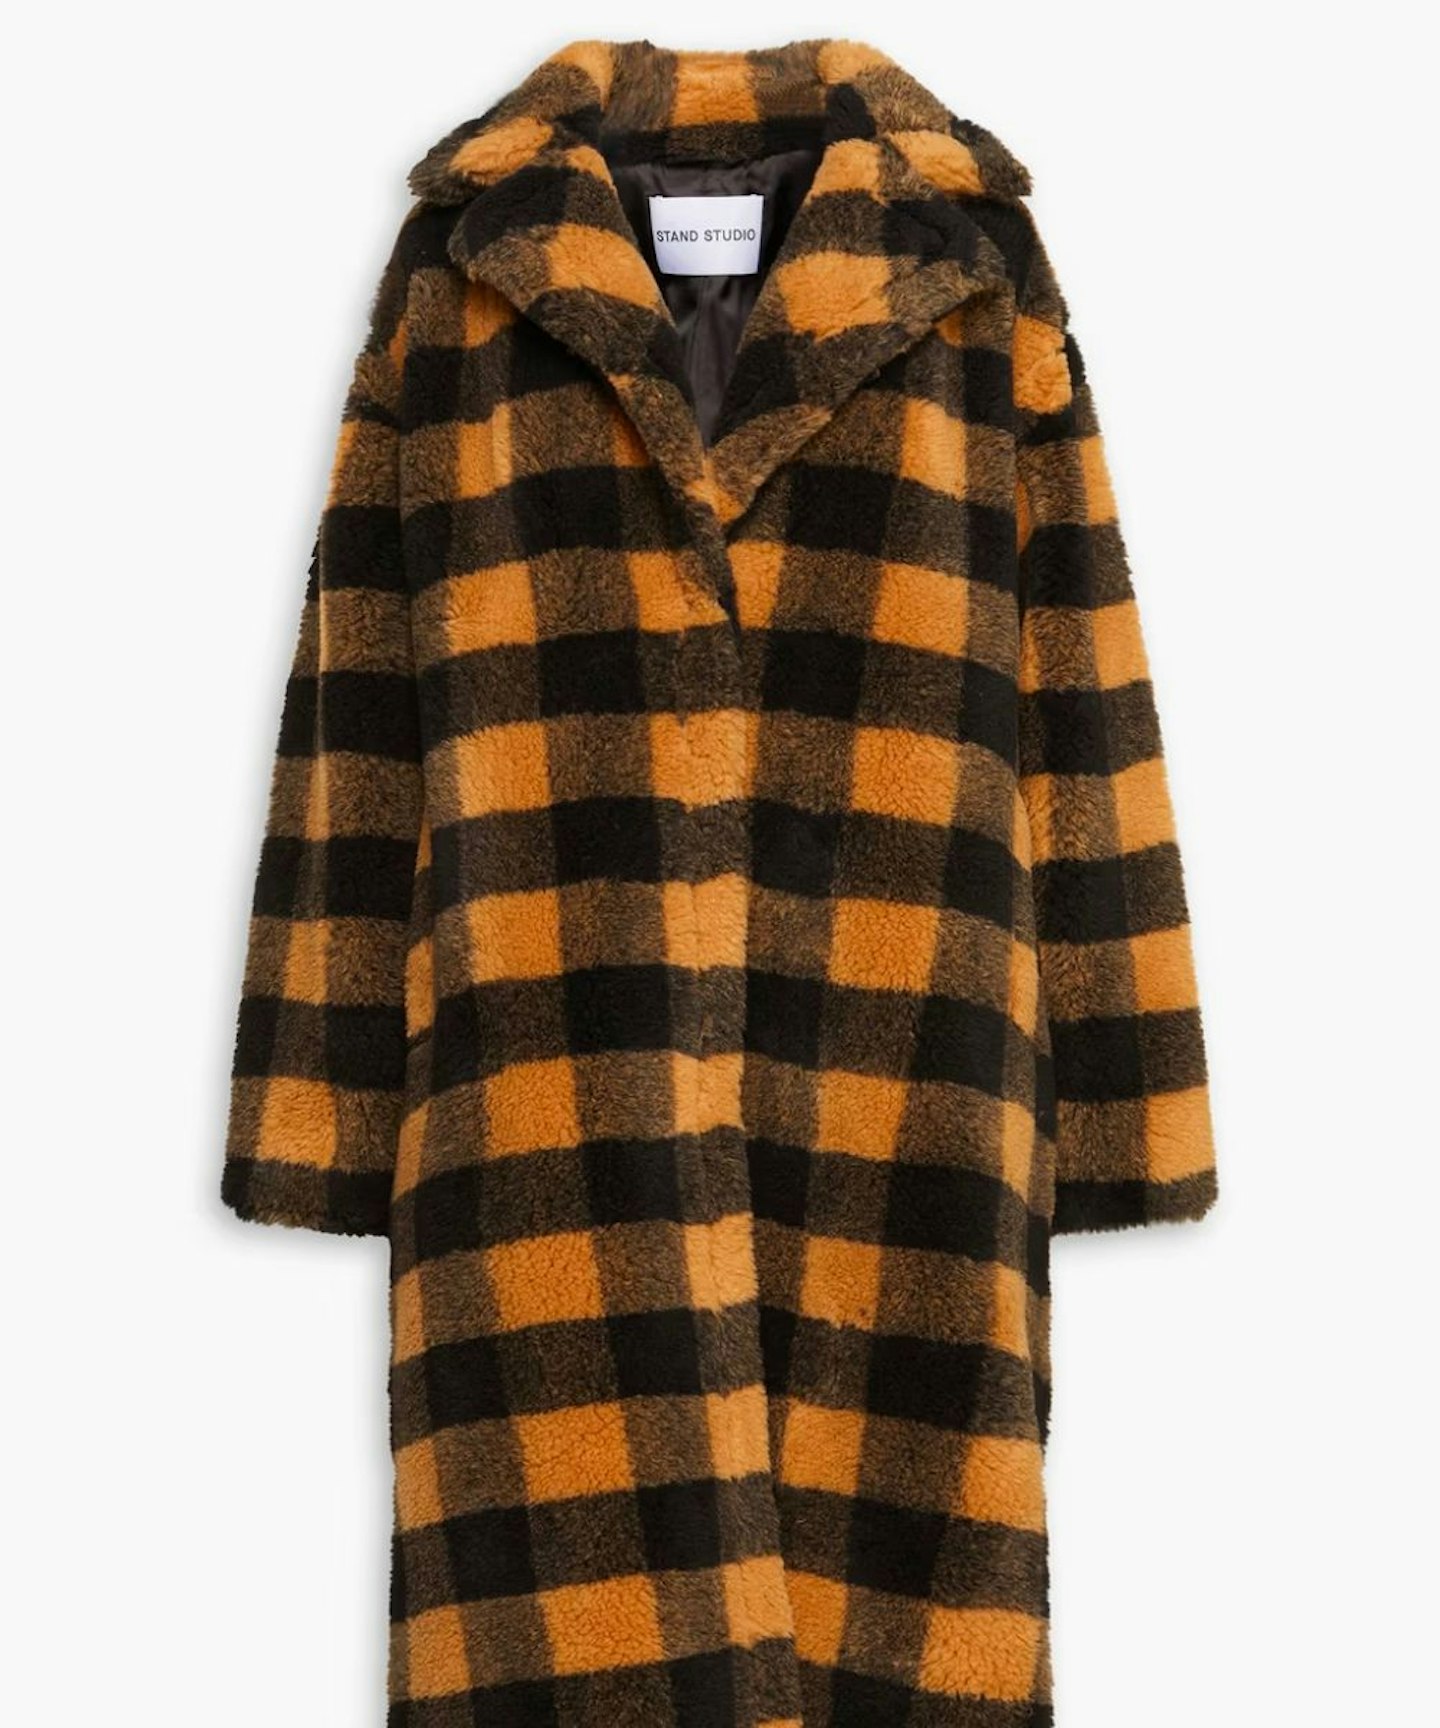 Stand Studio Maria Checked Faux Shearling Coat